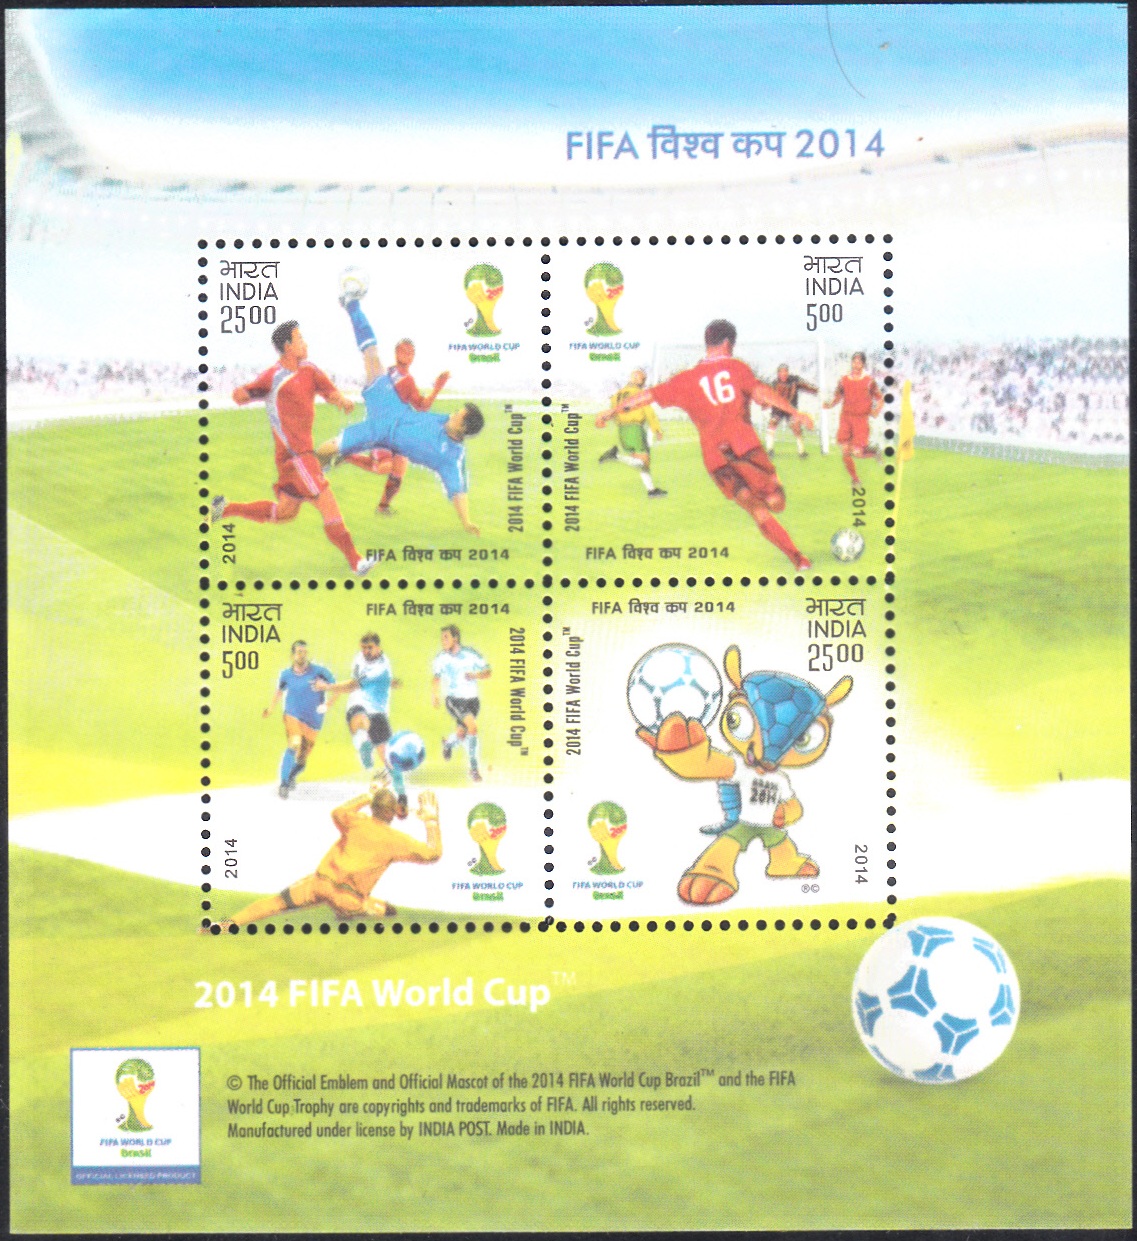  India on 2014 FIFA World Cup